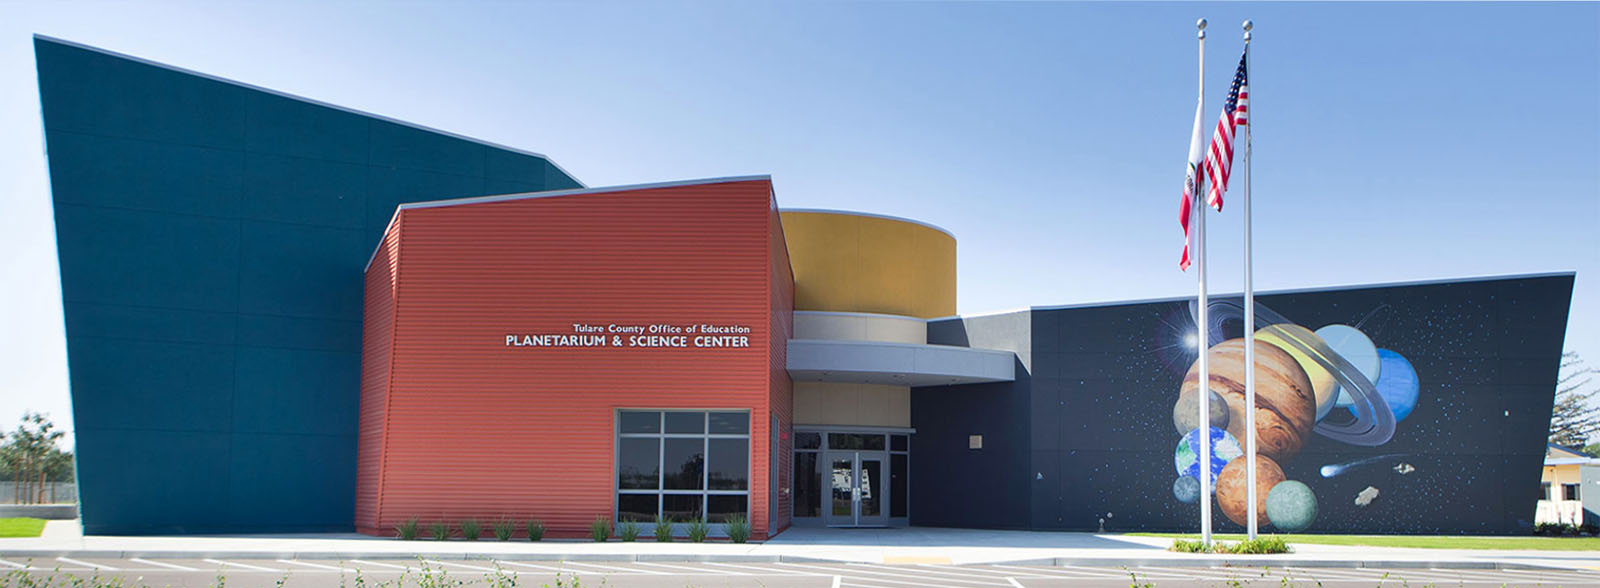 image of the Tulare County Office of Education's Planetarium & Science Center